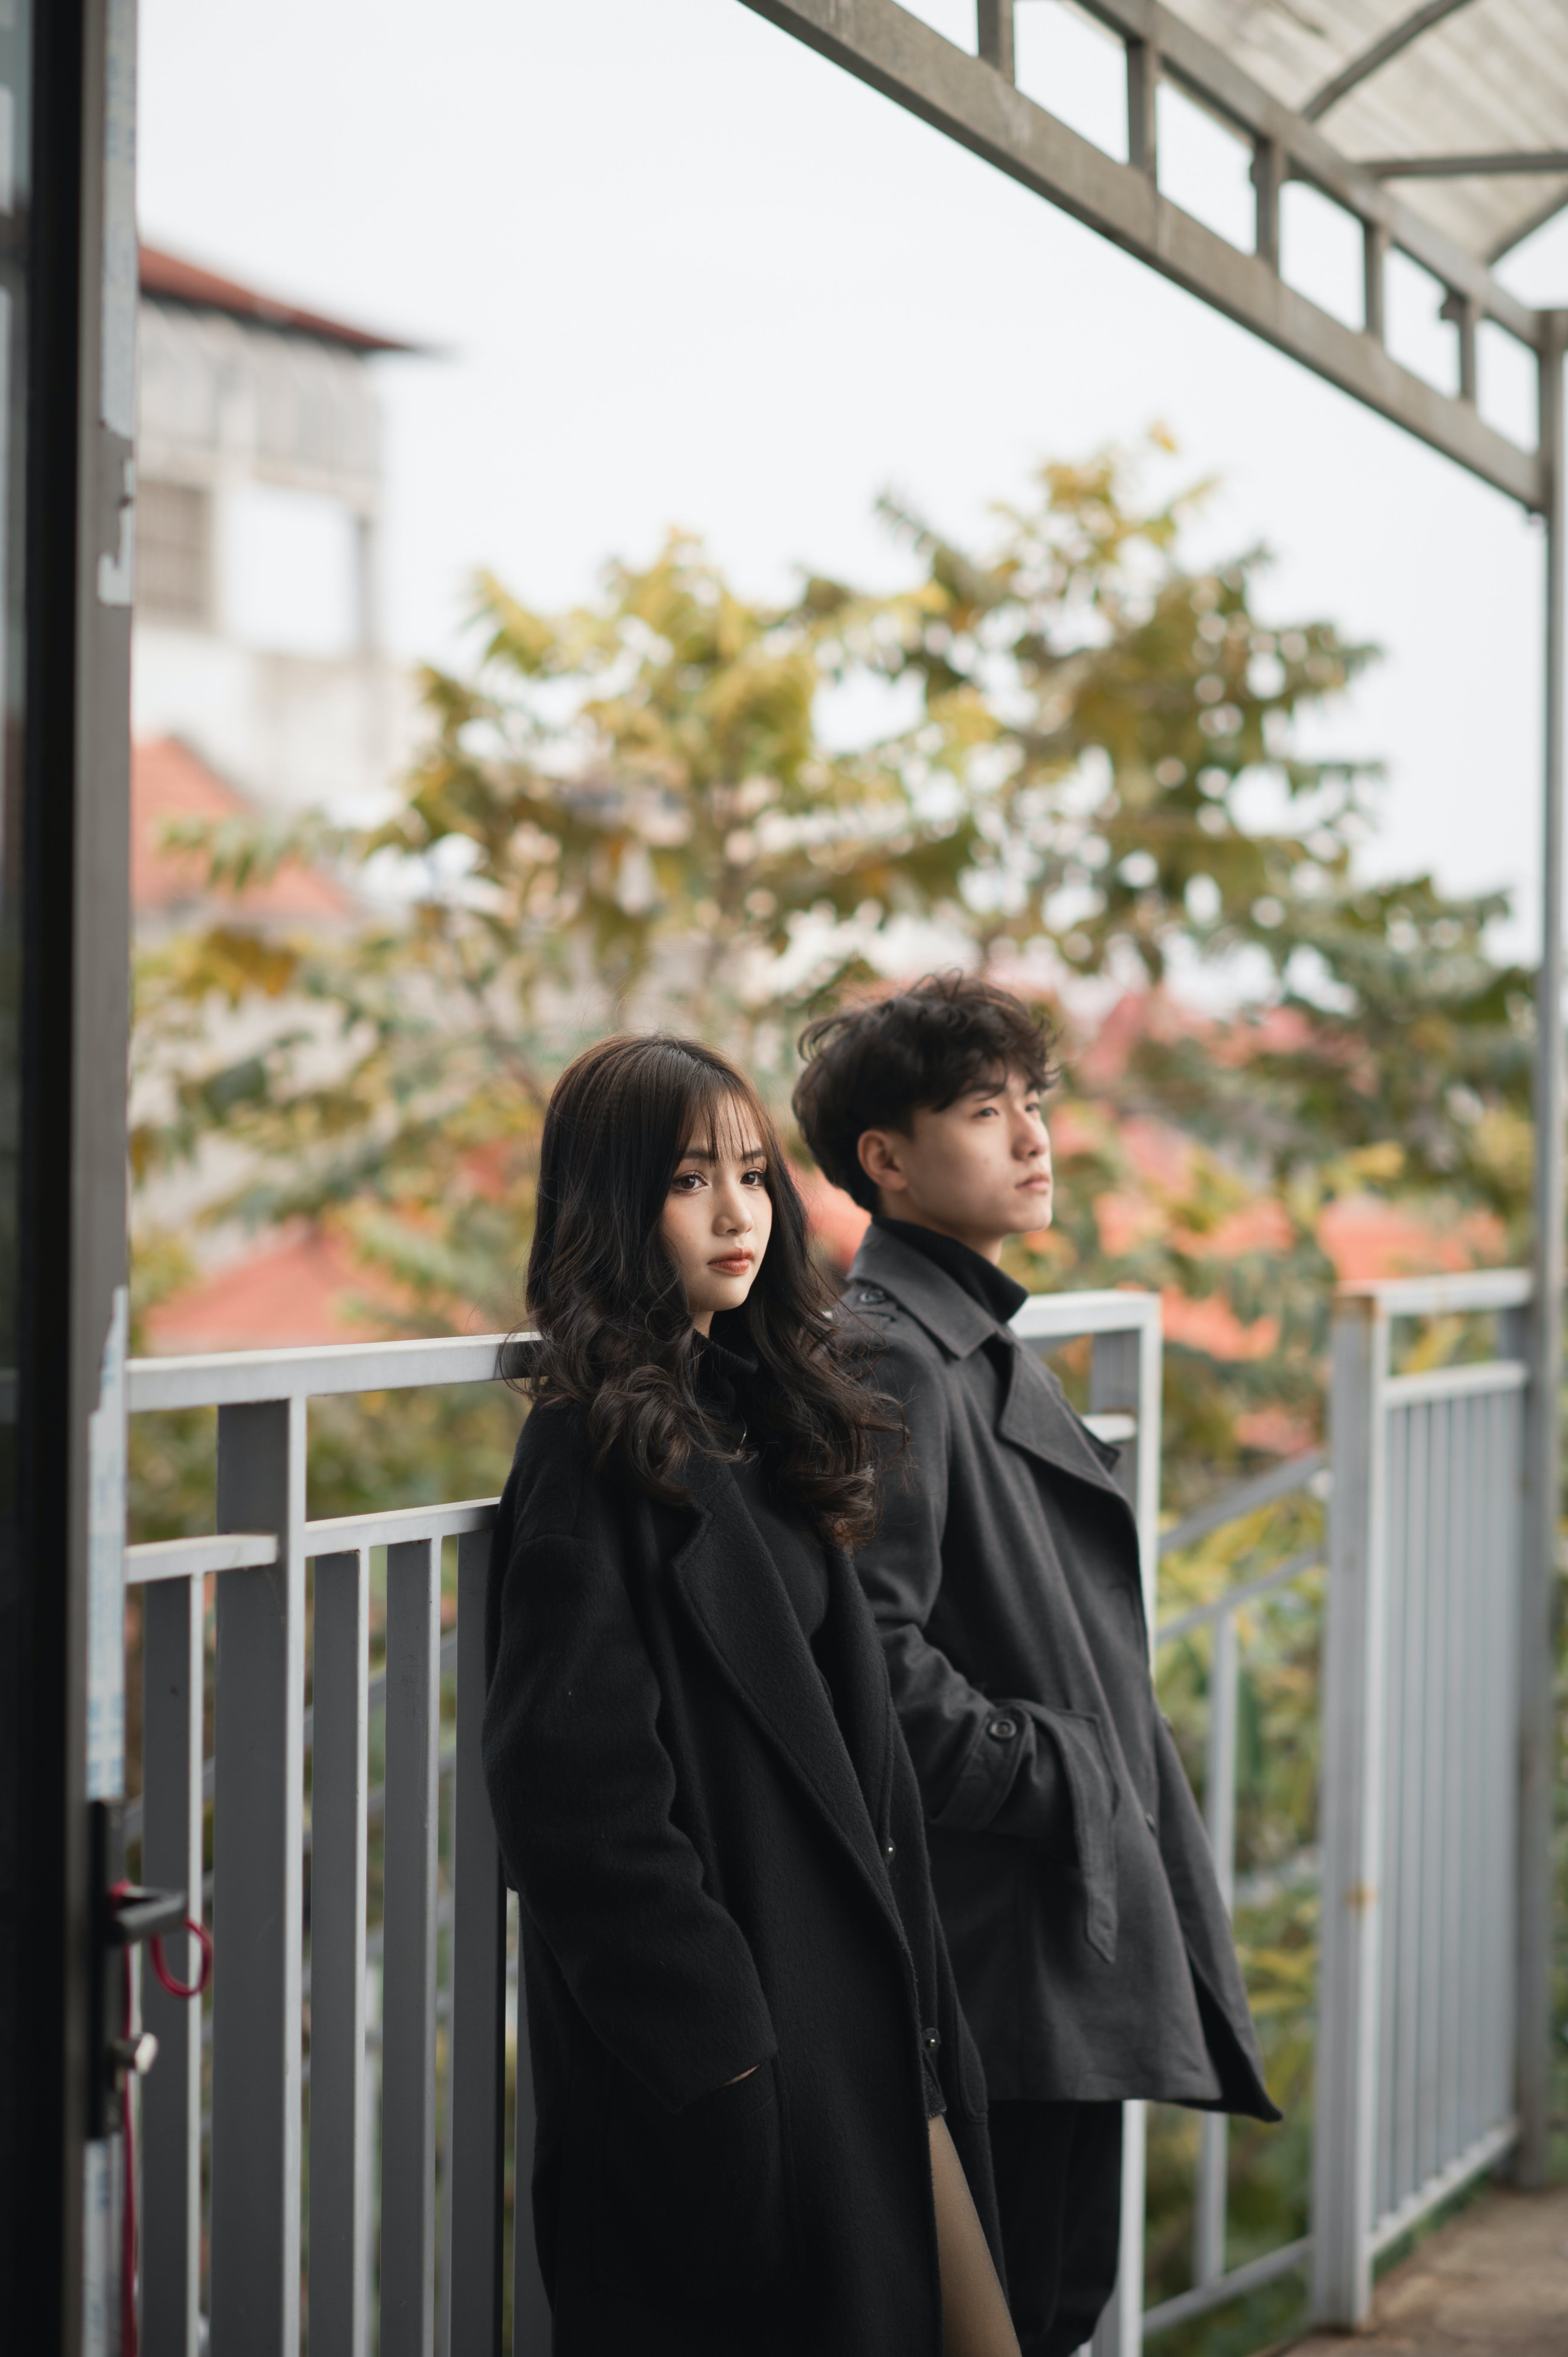 A young man and a woman standing on a Terrace. | Source: Pexels